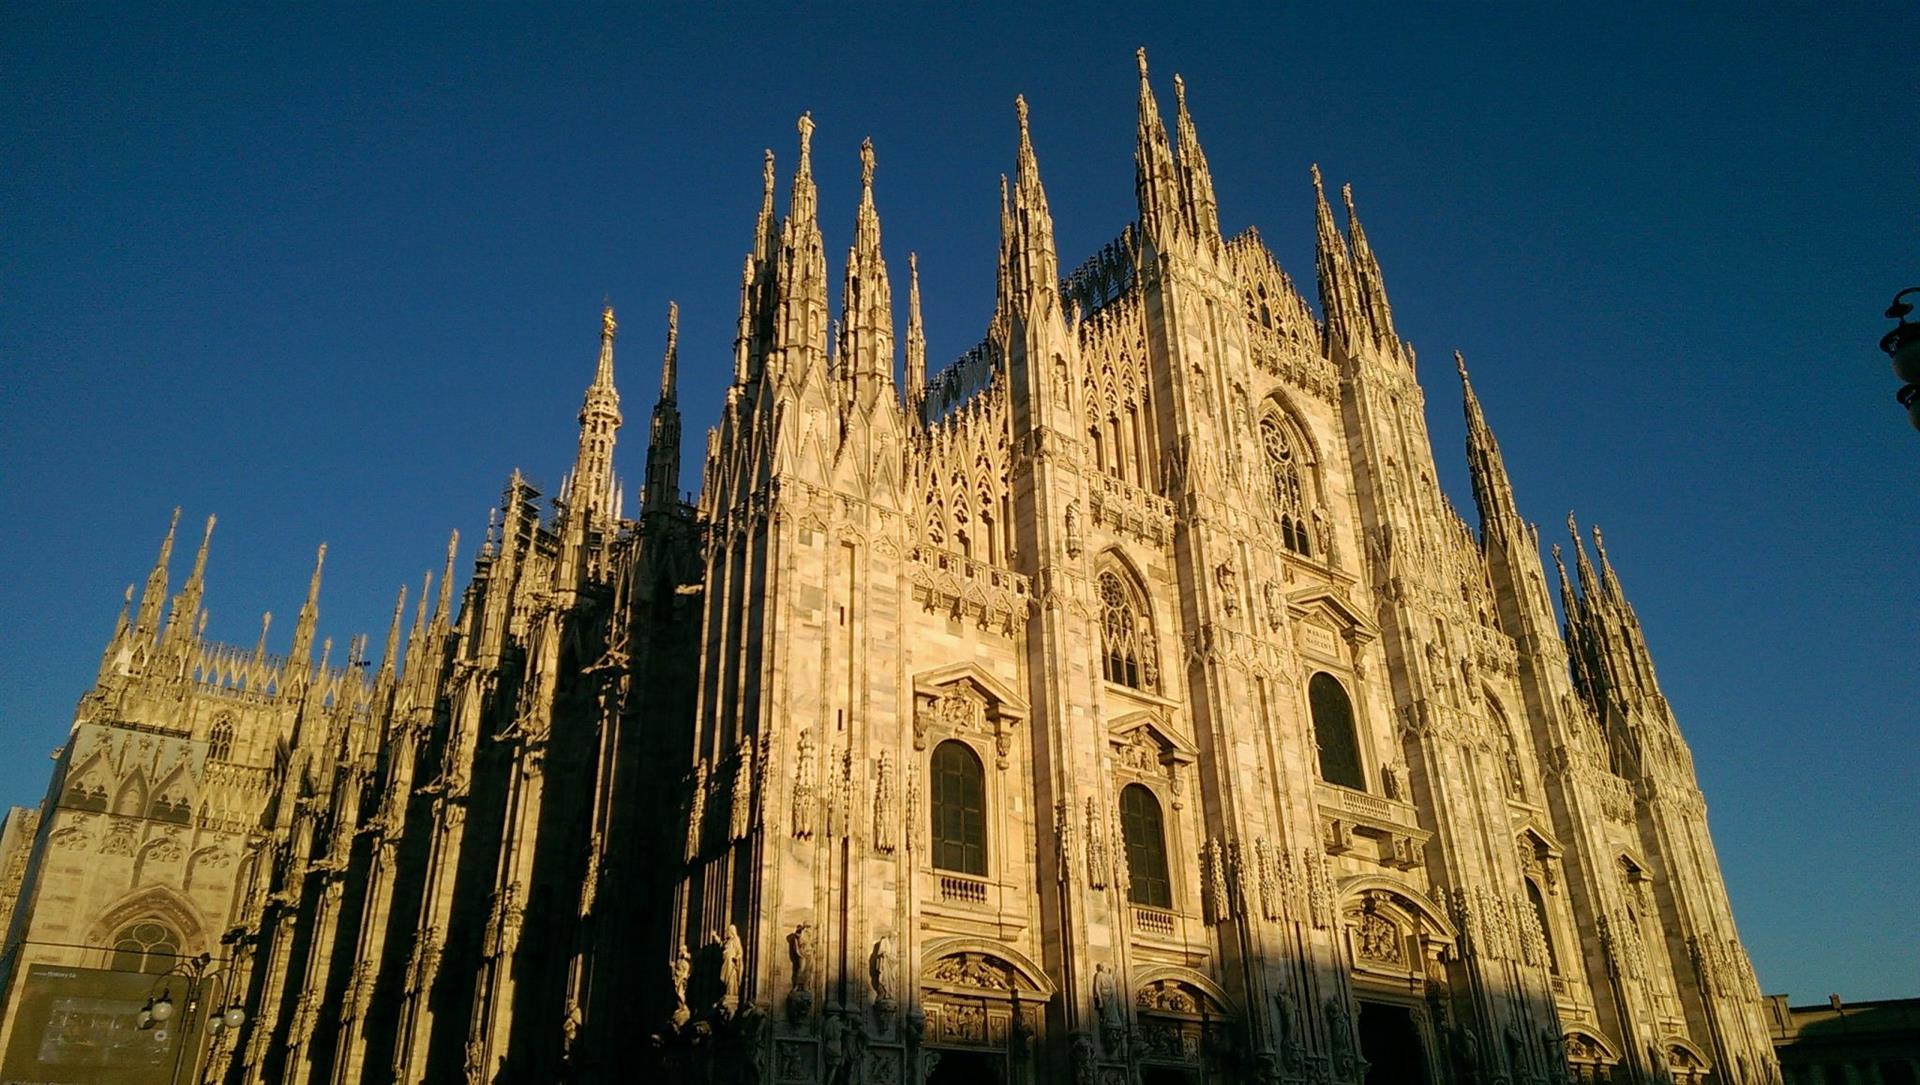 The Cathedral - Duomo di Milano OFFICIAL SITE